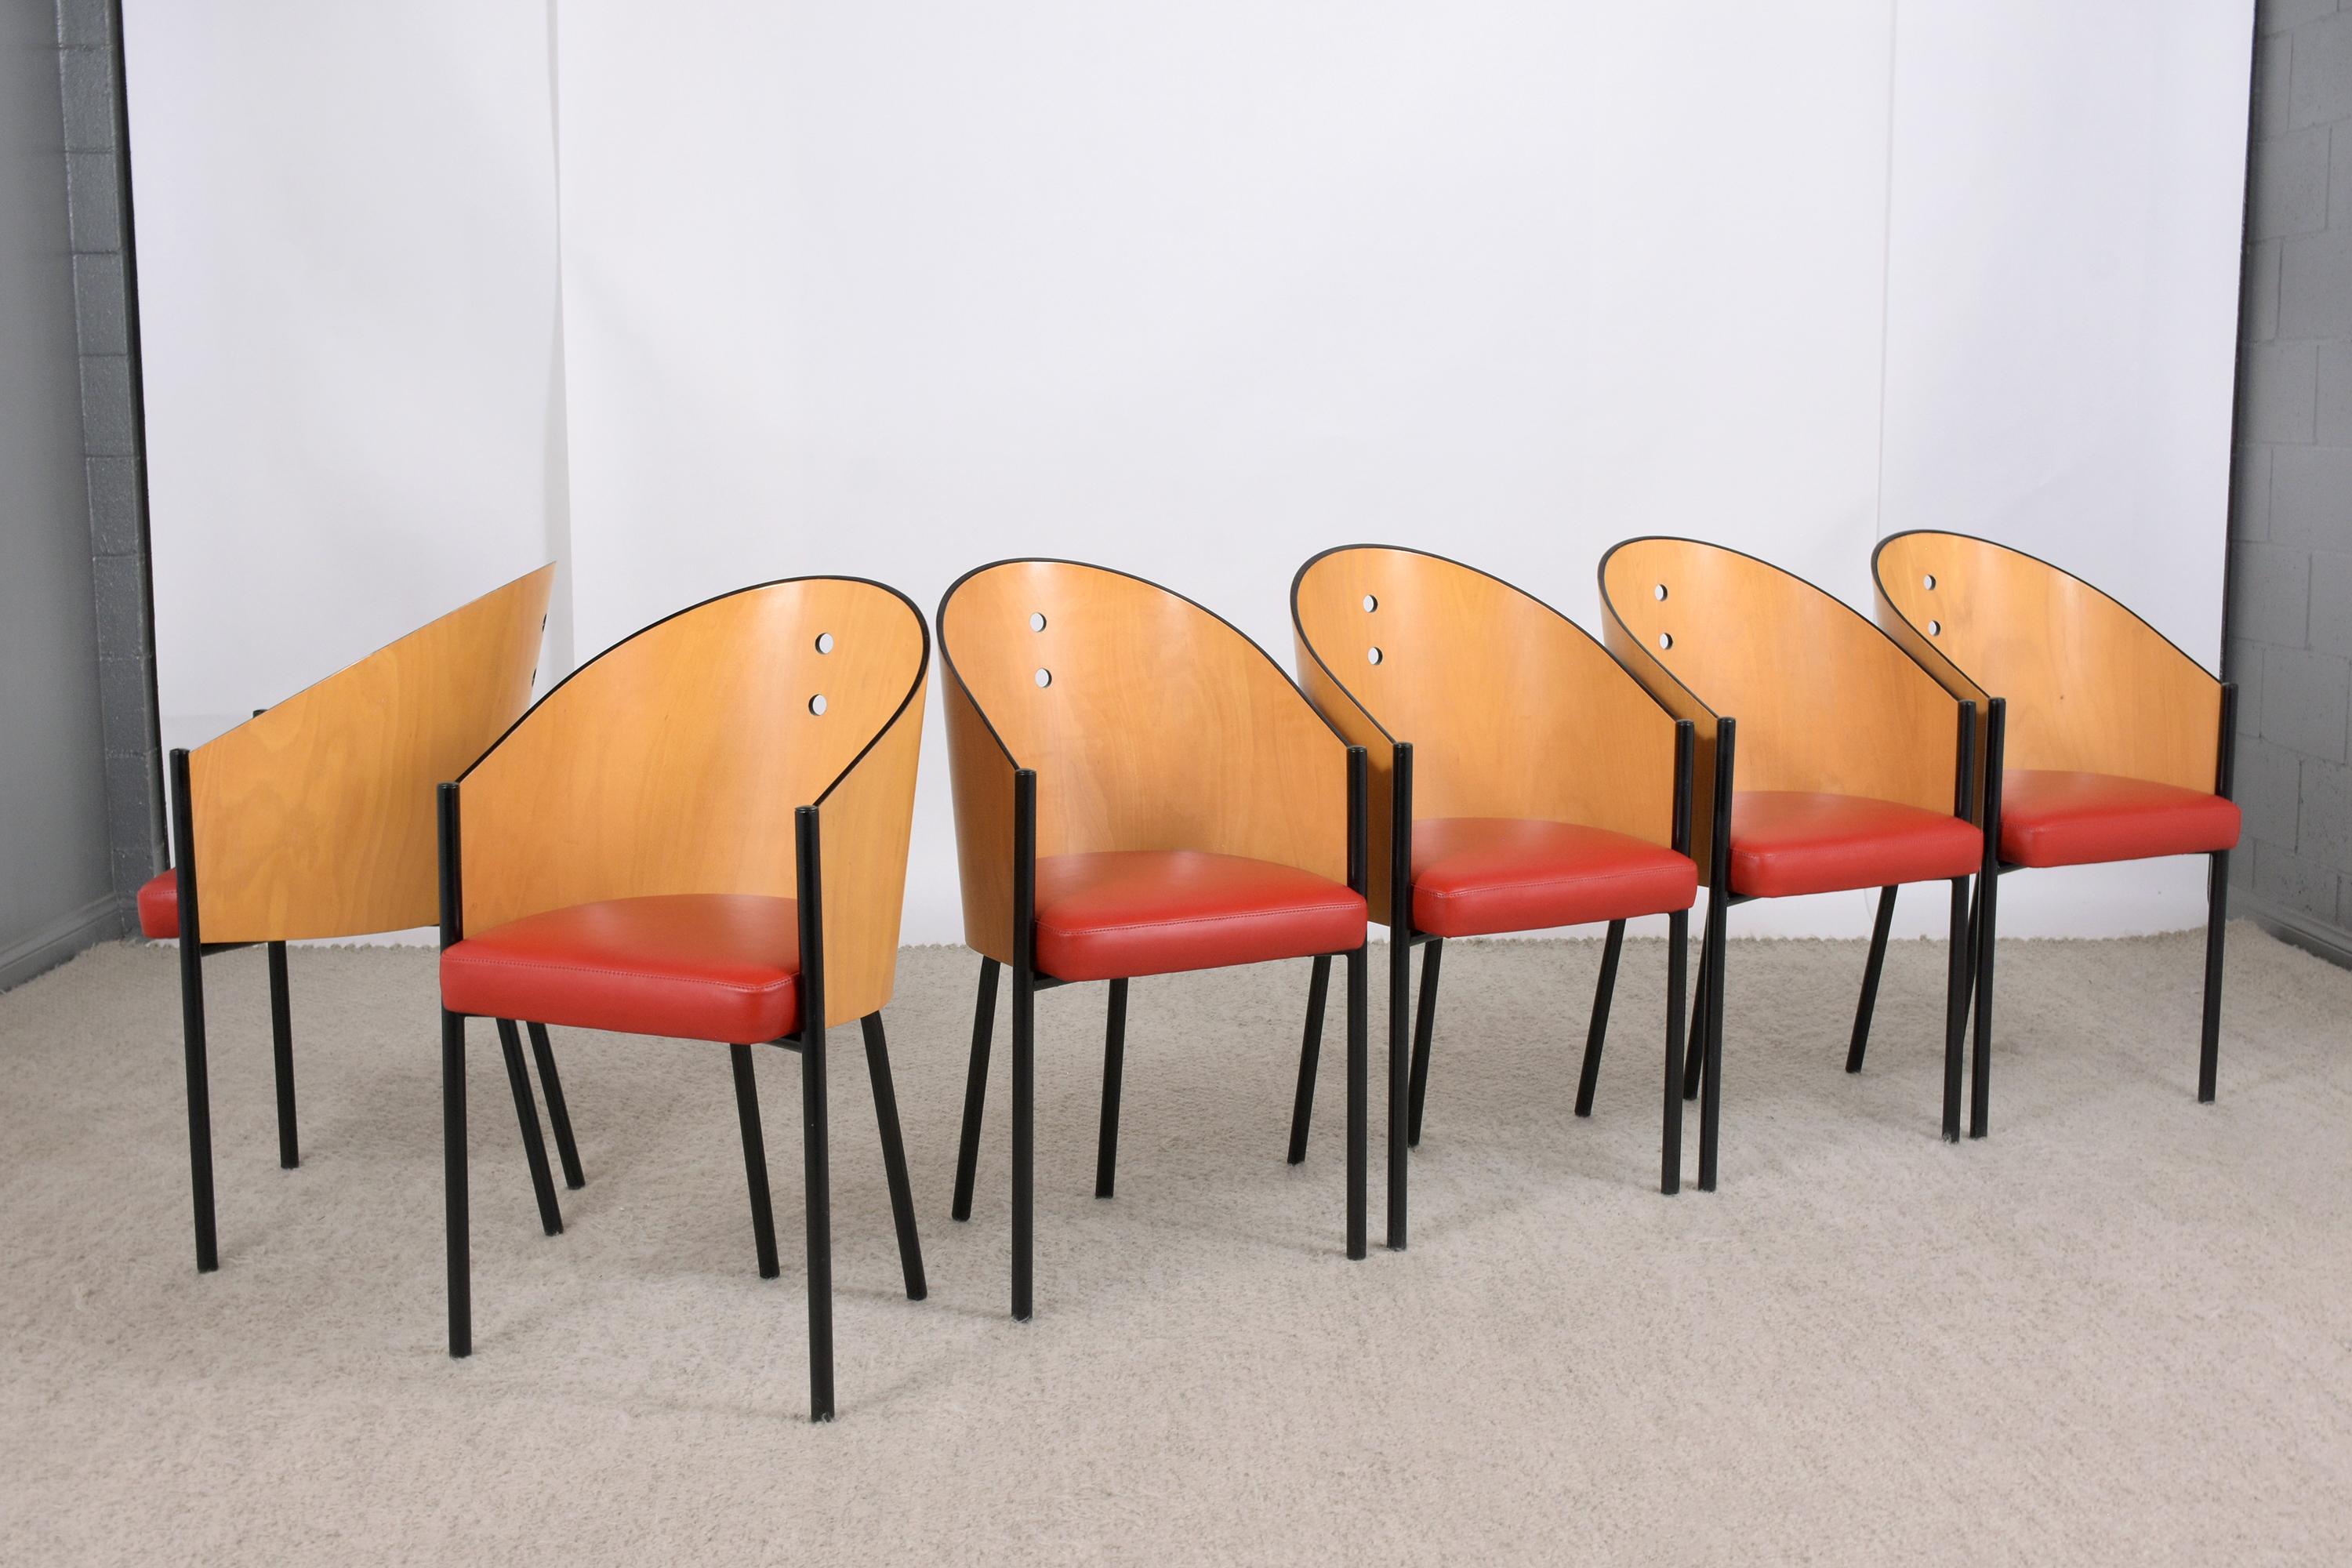 Introducing our exquisite collection of eight vintage mid-century dining chairs, showcasing expert craftsmanship and timeless design. Skillfully restored to their original splendor by our team of expert craftsmen, these chairs are handcrafted from